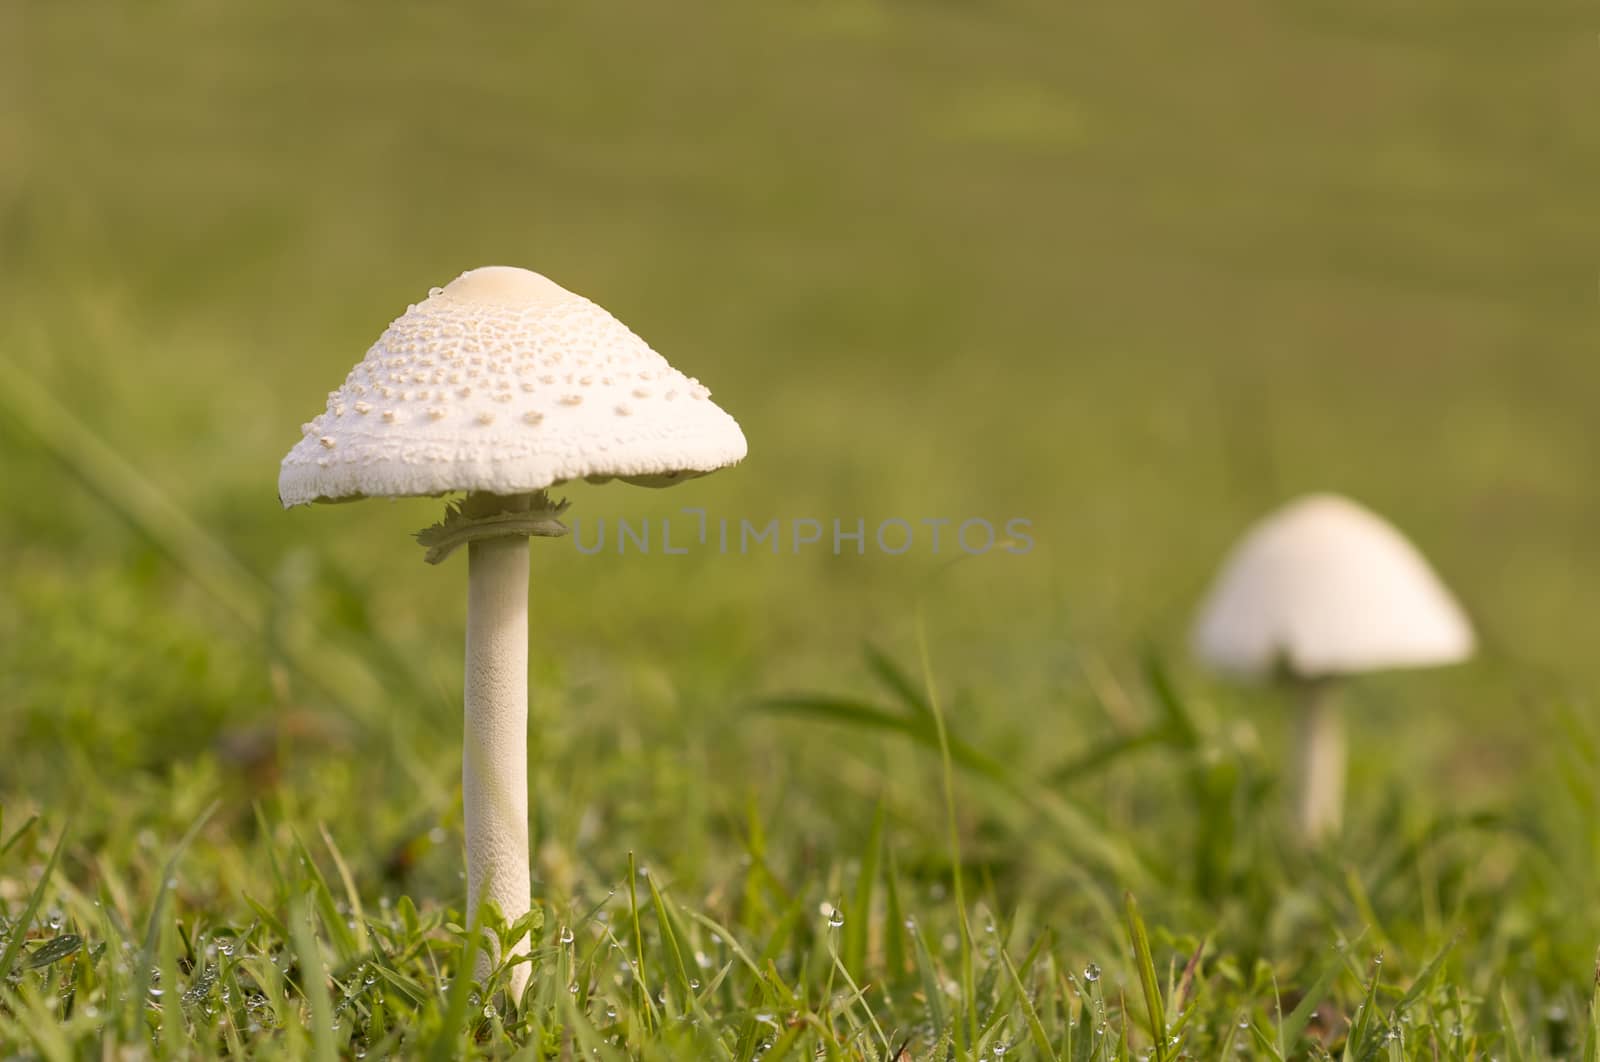 Mushrooms emerges after rain by sherj